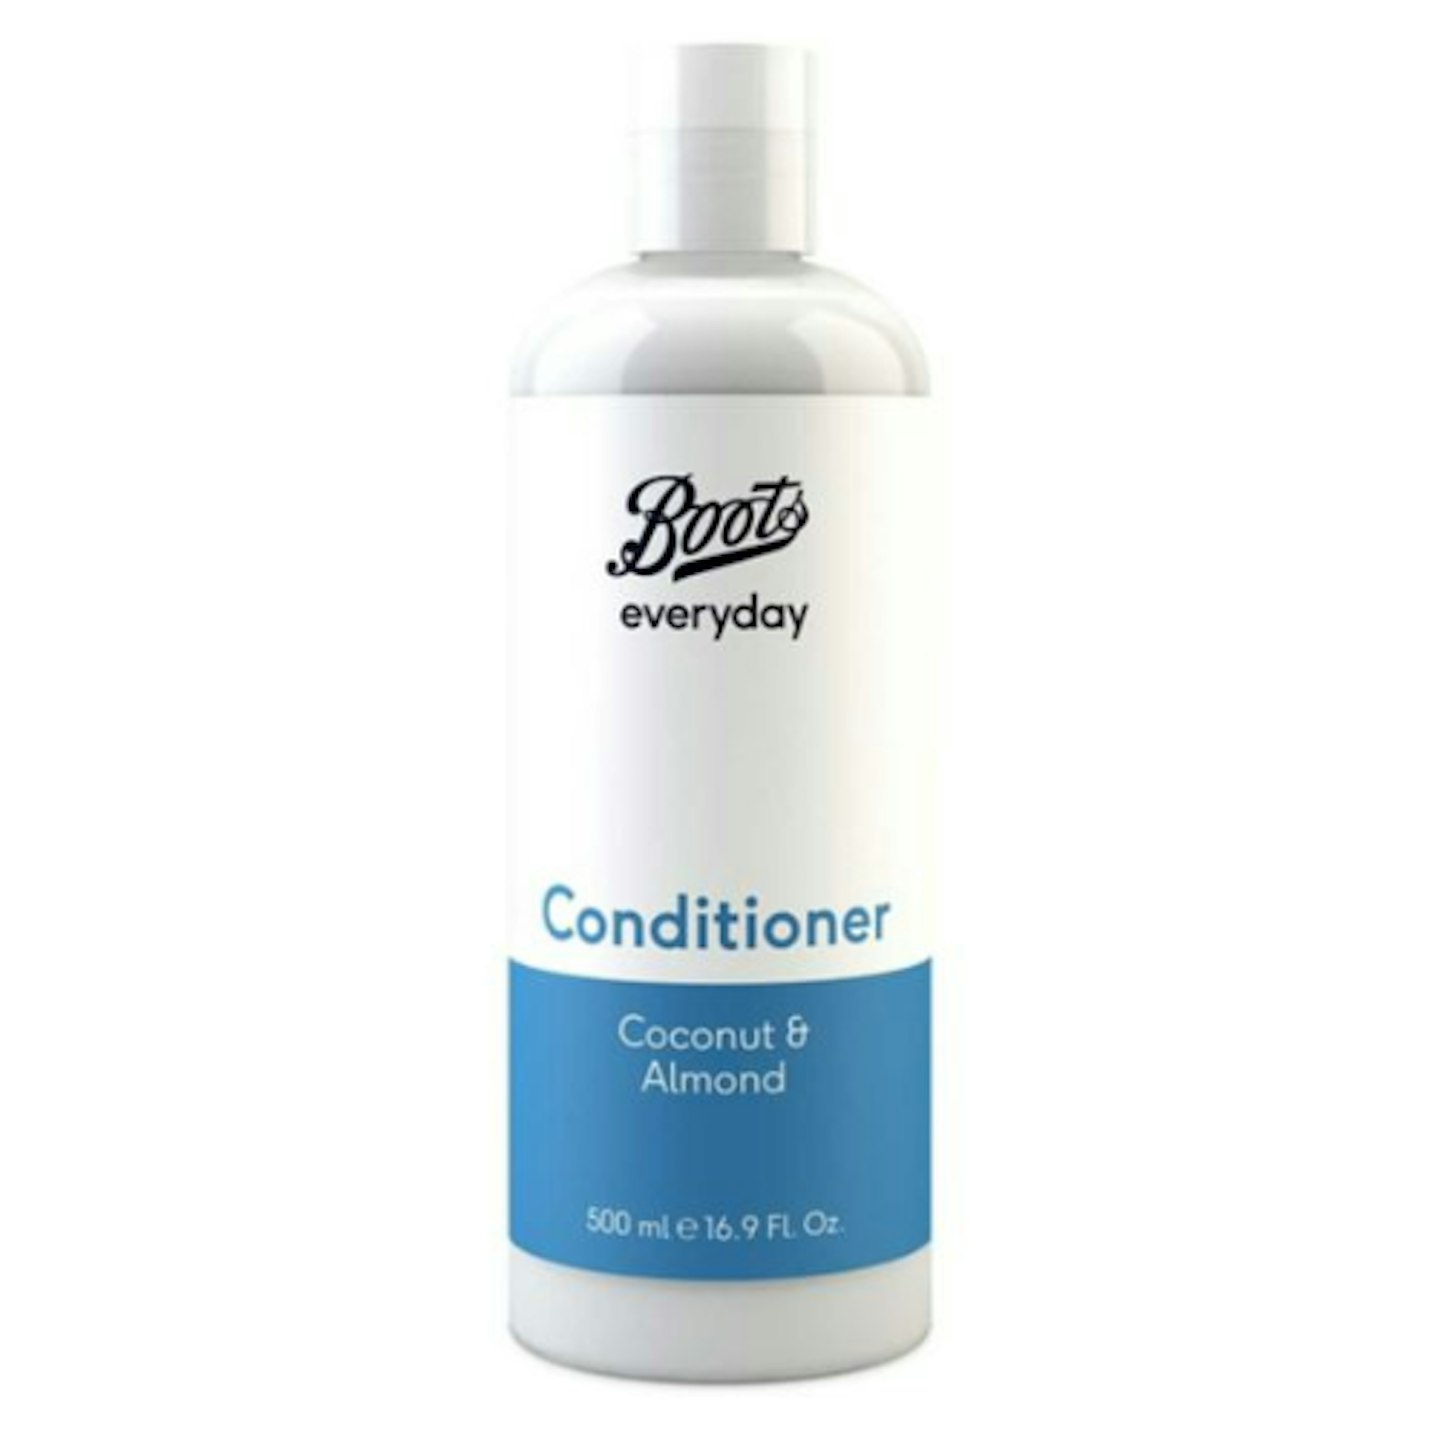 Boots everyday Conditioner coconut & almond 500ml